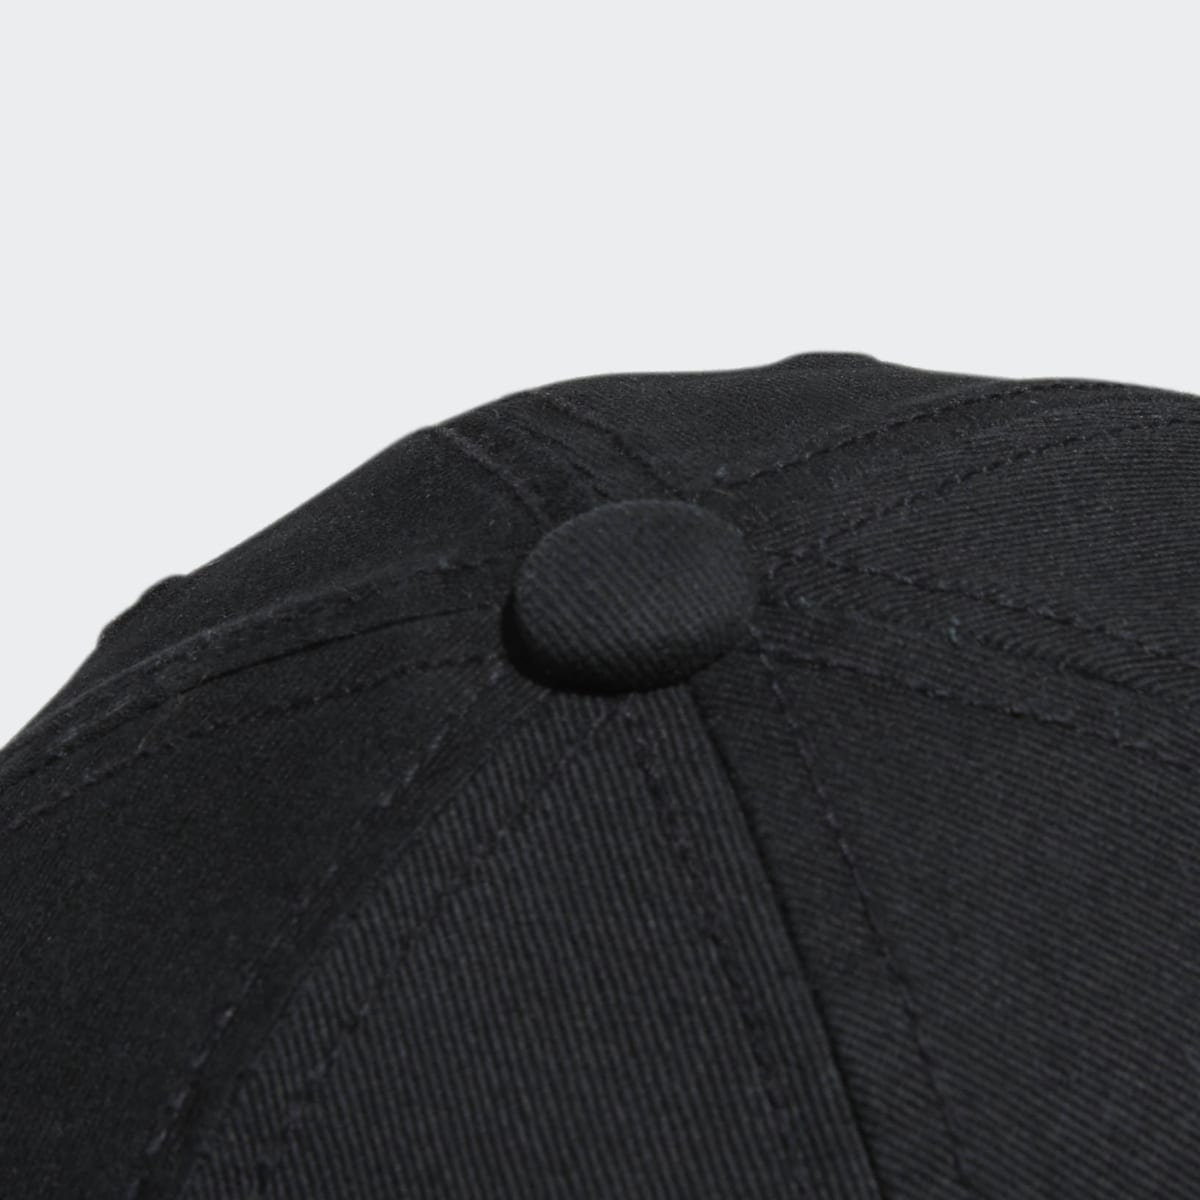 Adidas Relaxed Strap-Back Hat. 6